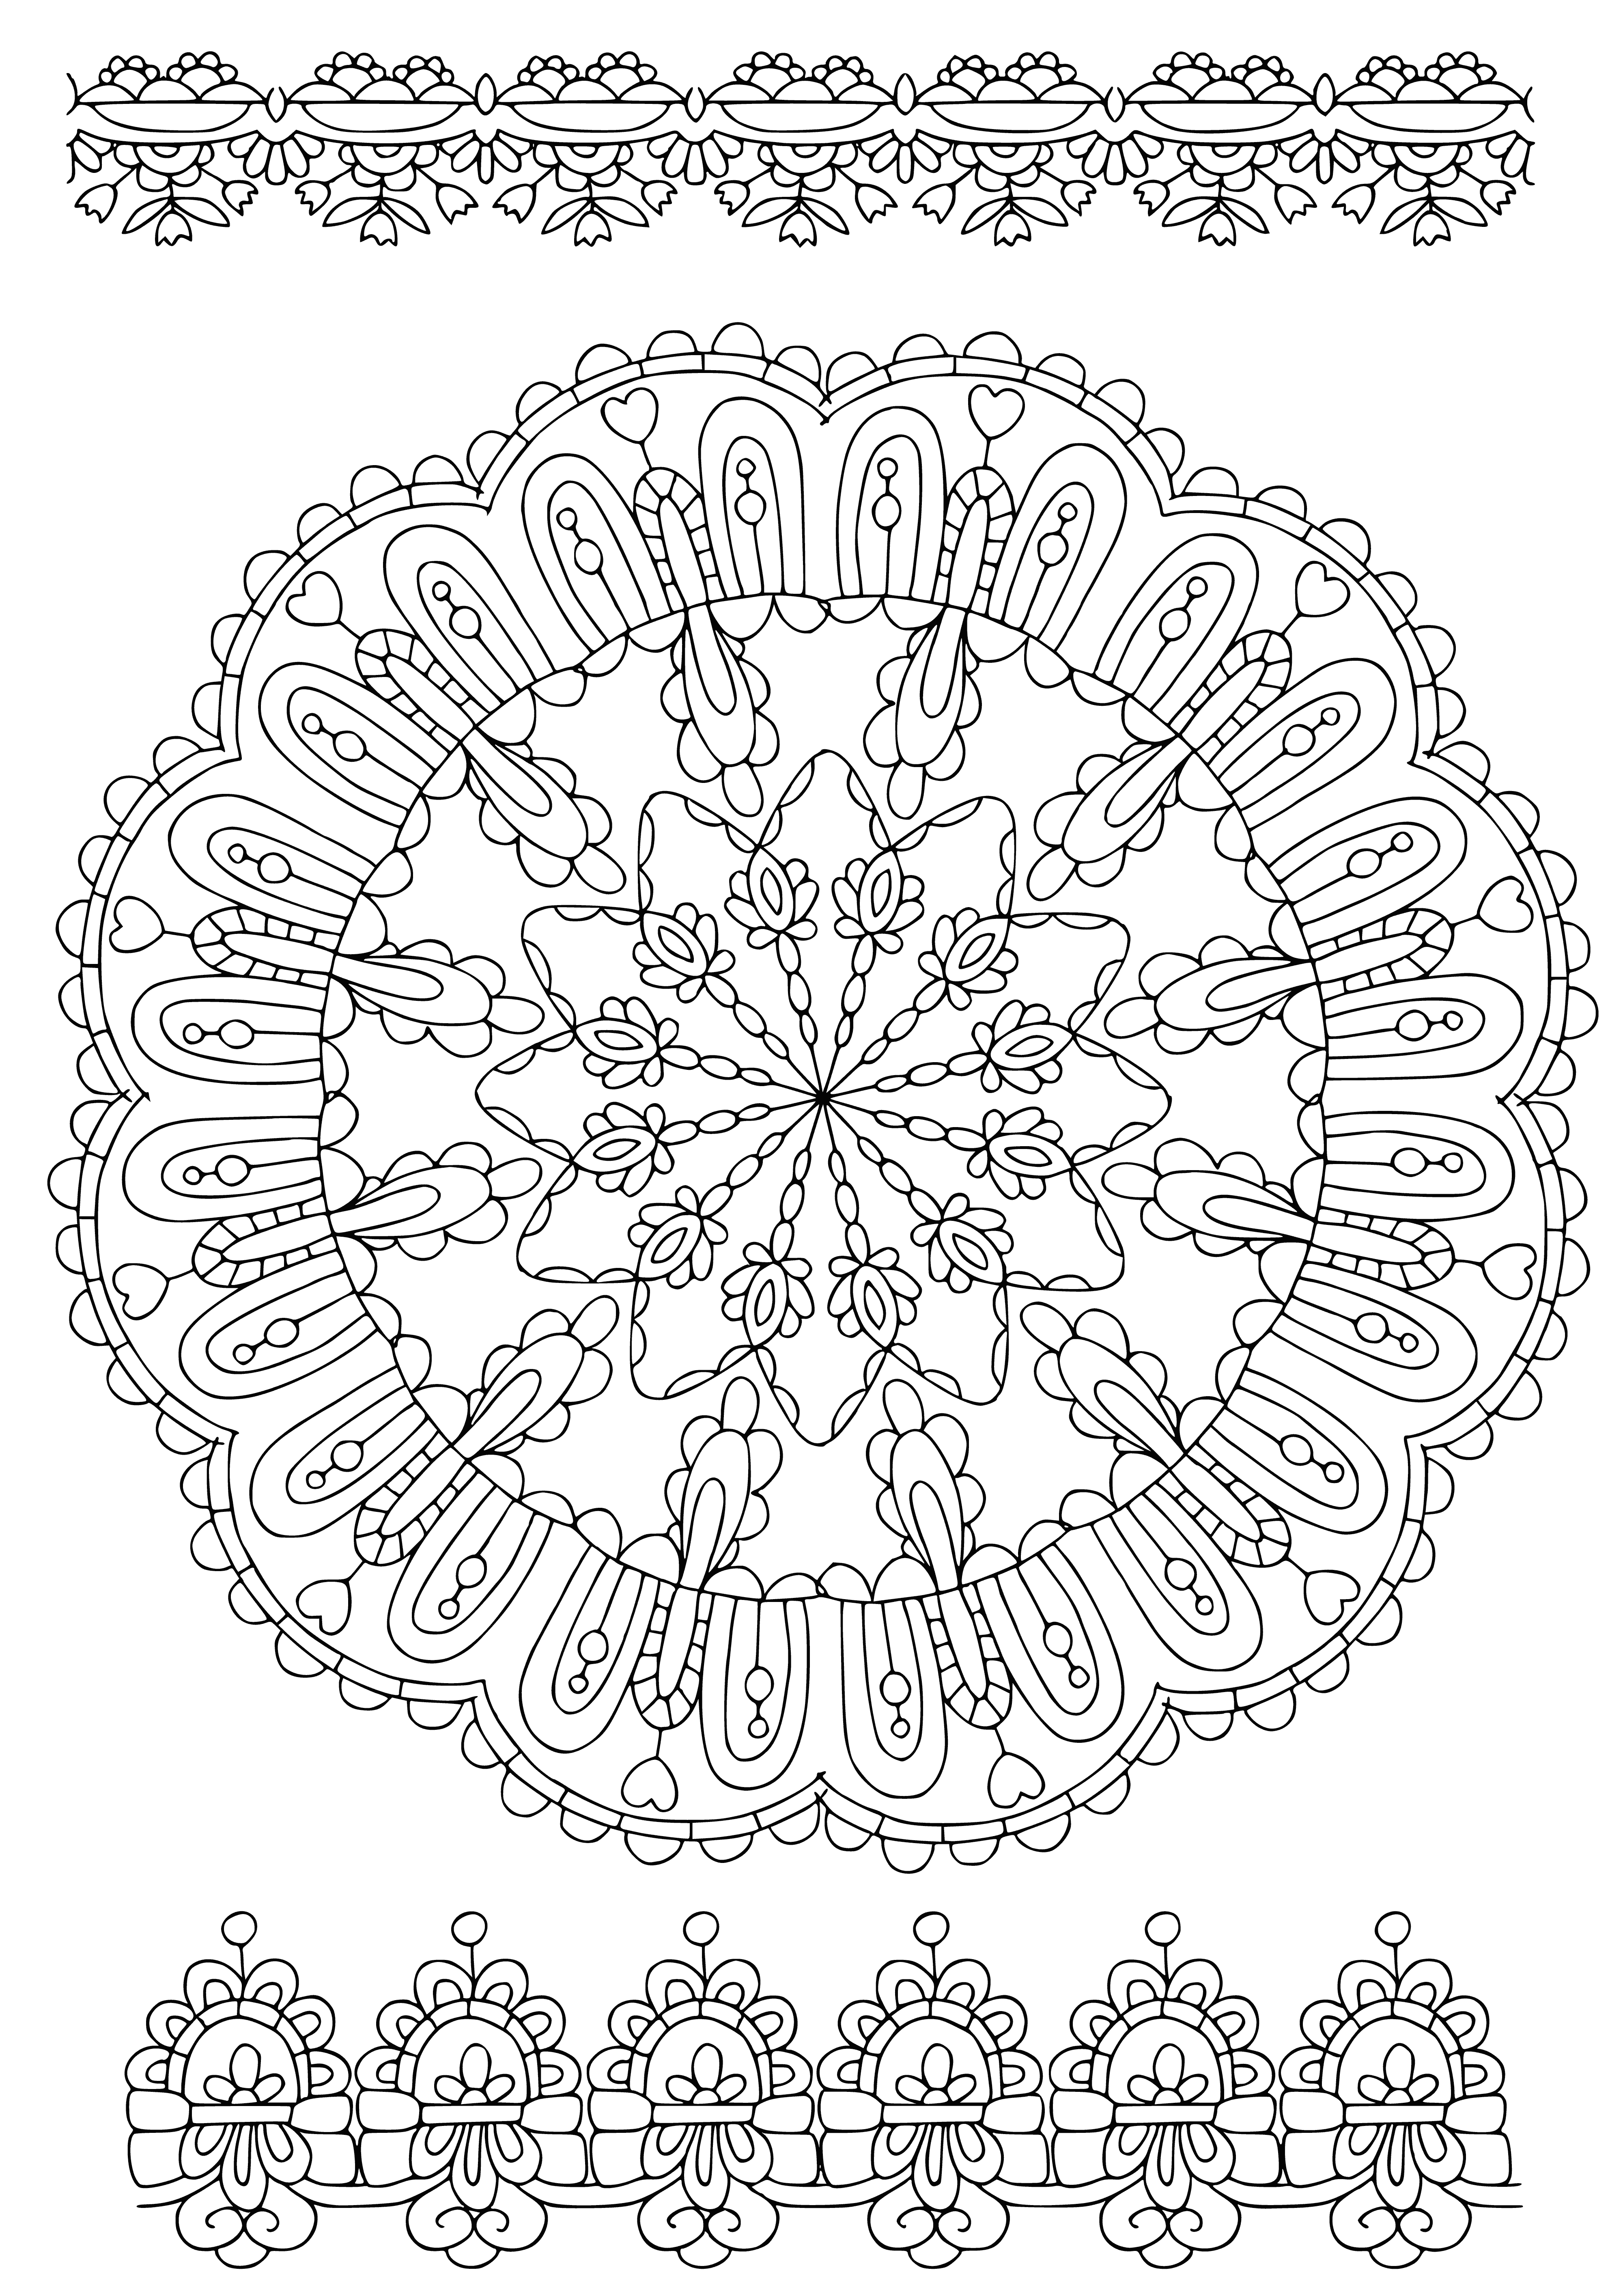 coloring page: A 2.5 cm dia. center circle with 8 petals of different colors, outlined in black. 8 curved lines in colored perimeters complete the mandala.